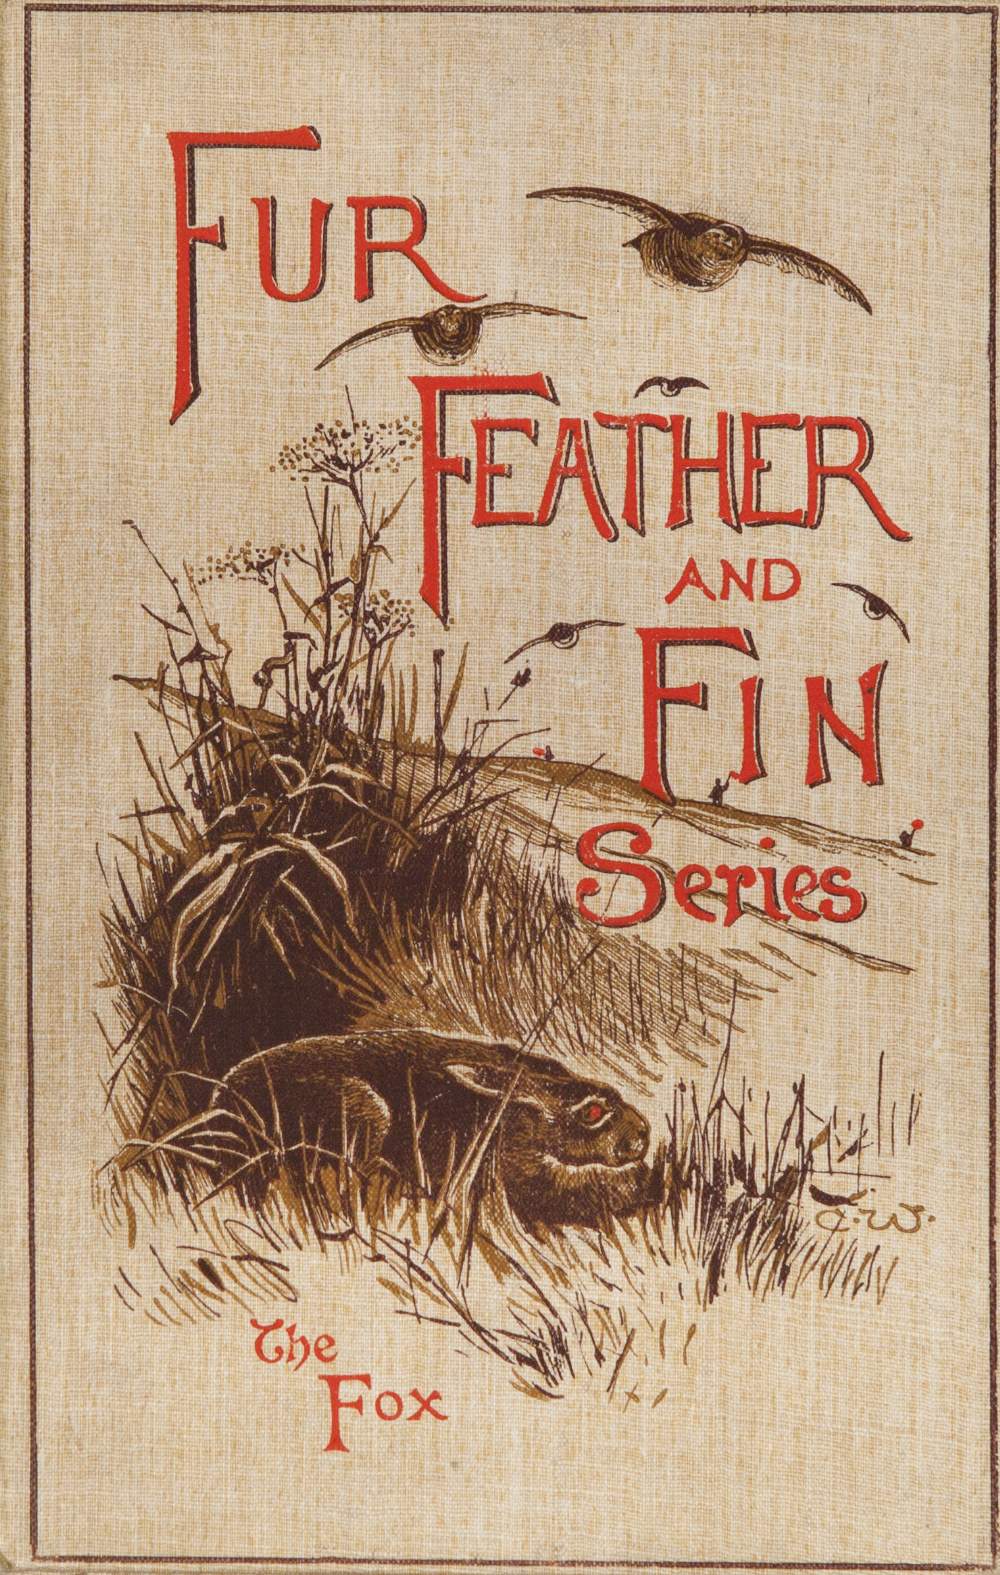 NINE TITLES FROM FUIS FEATHERS AND FINS SERIES. Published by Longman's to Include; Snipes and - Image 2 of 2